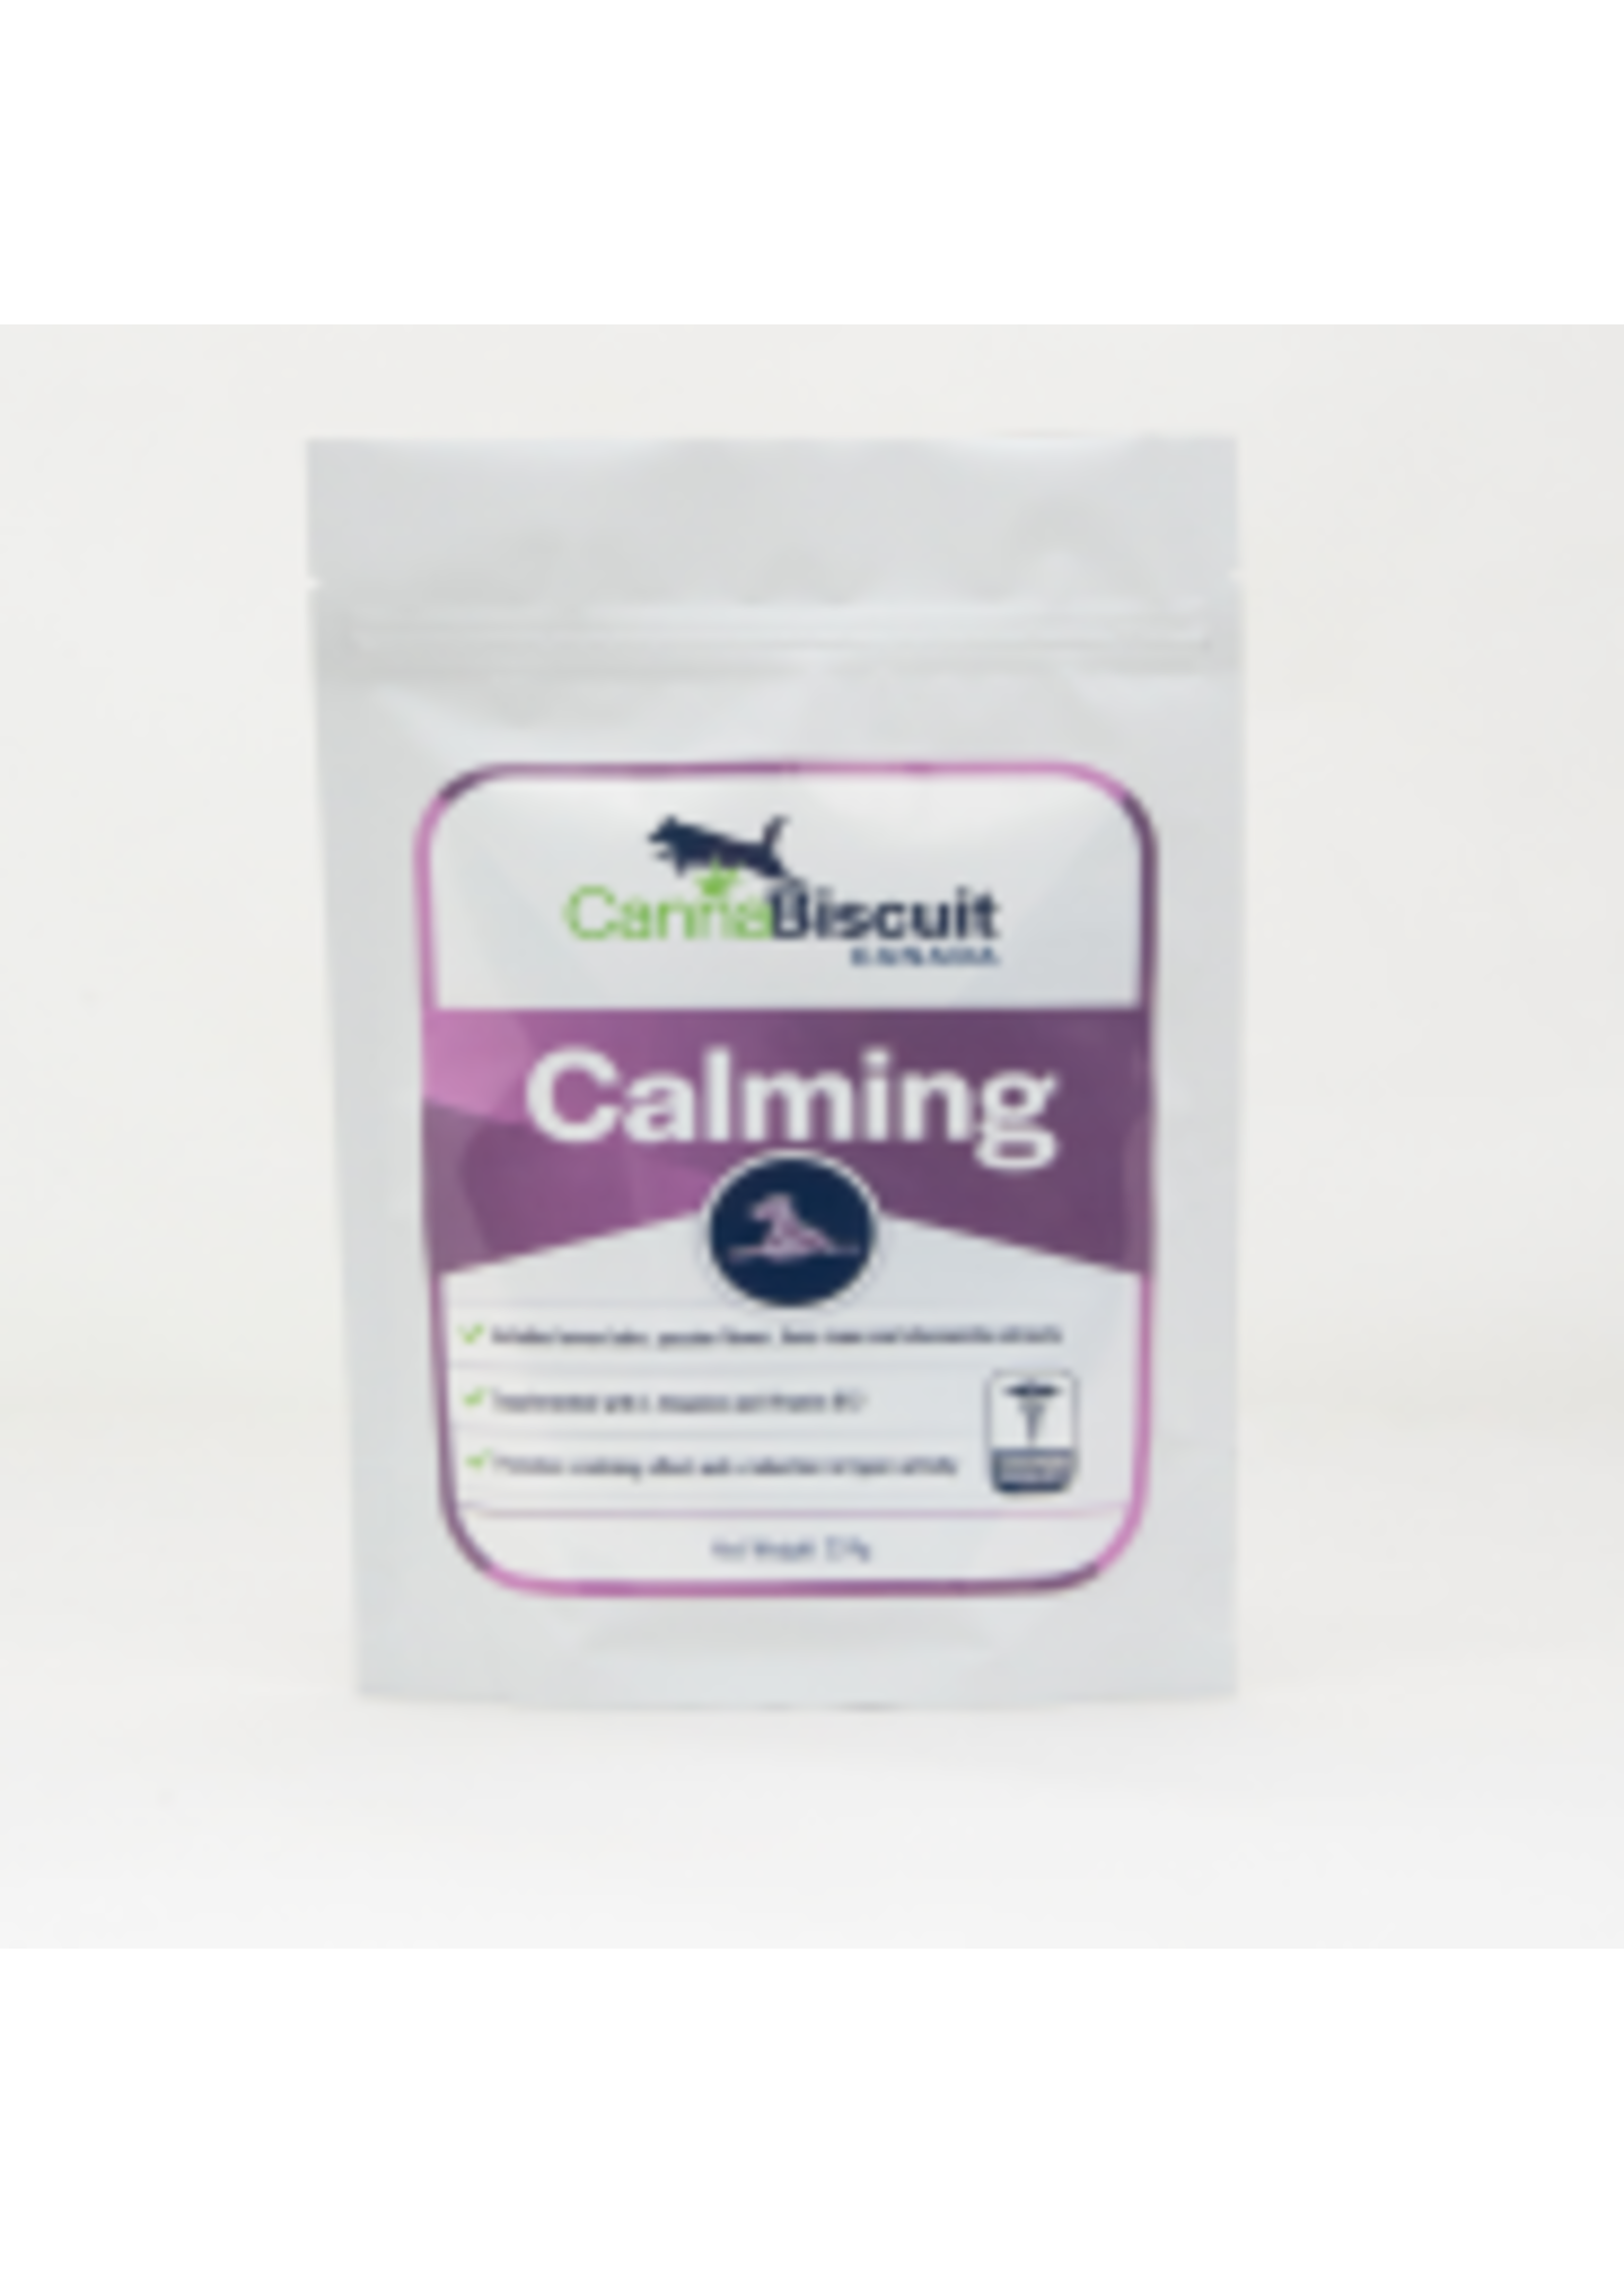 Cannabiscuit Cannabiscuit - Calming 224g